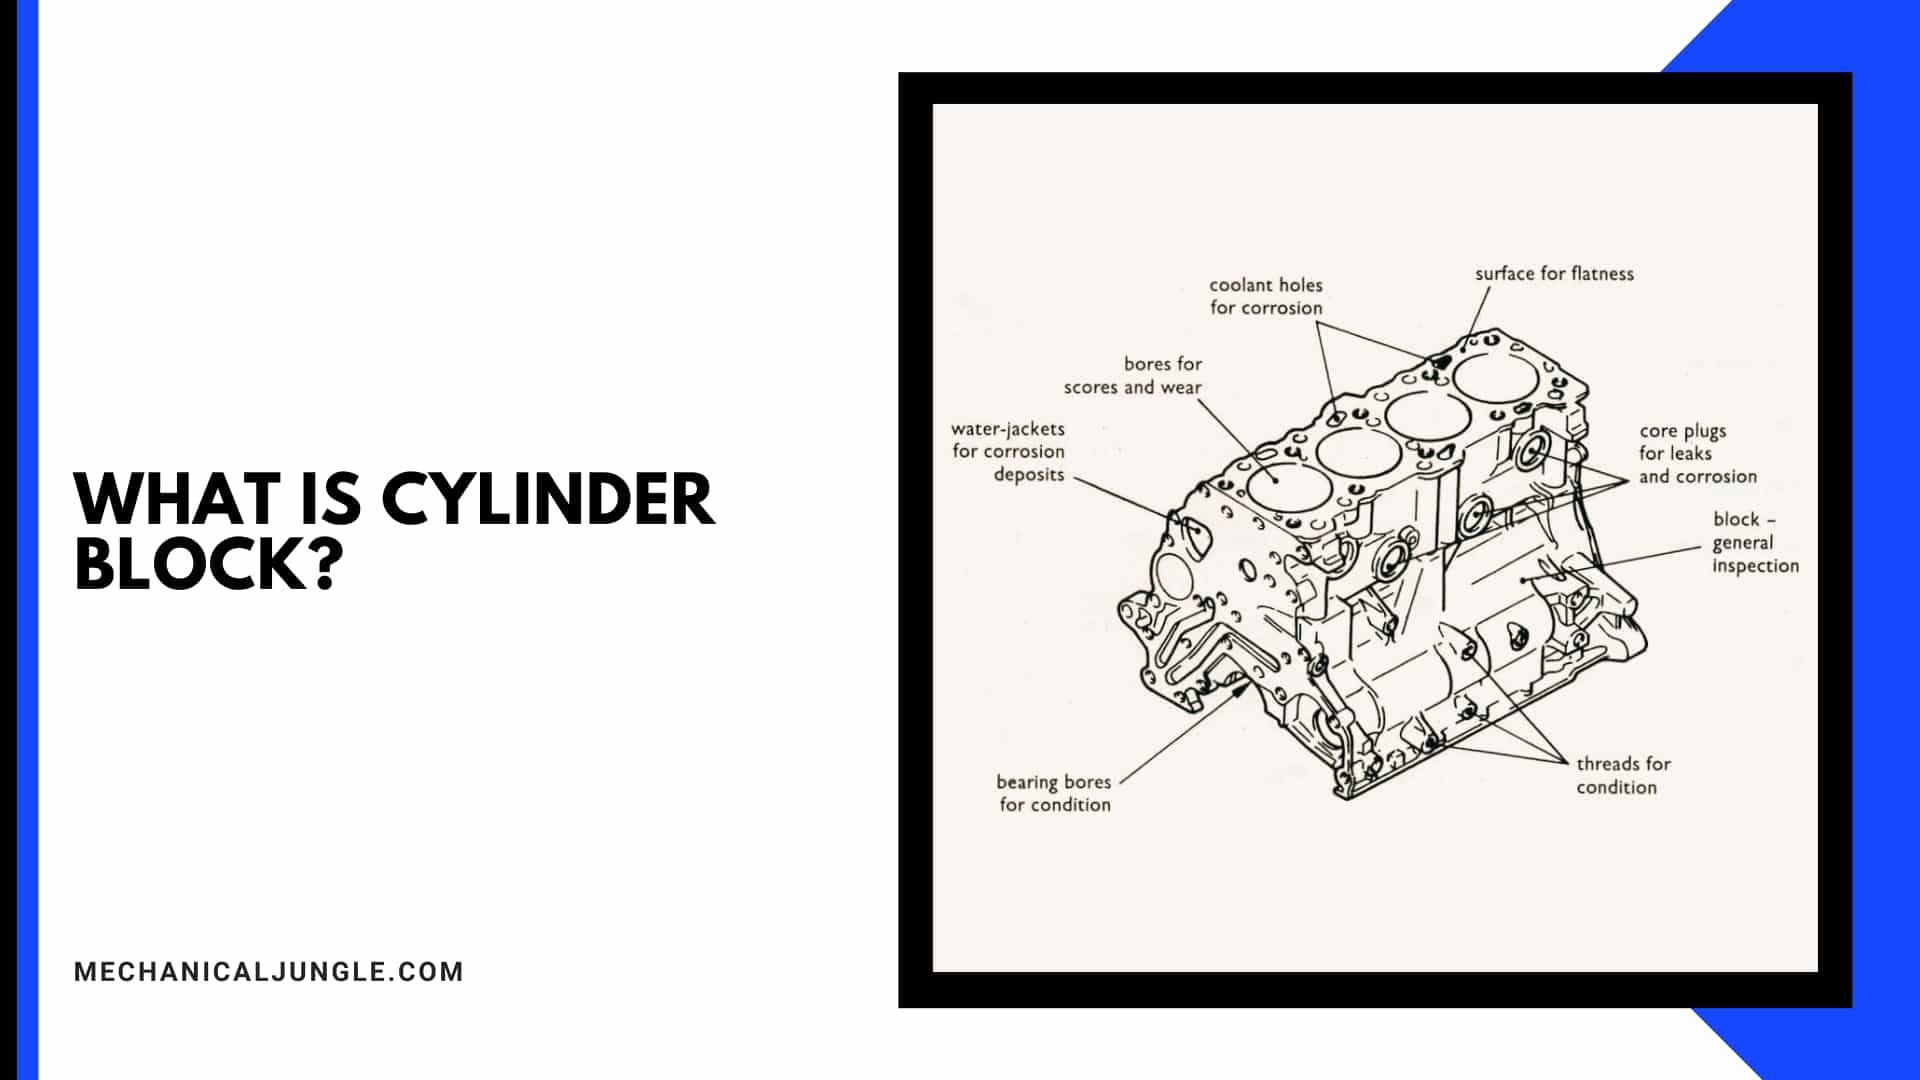 What Is Cylinder Block?